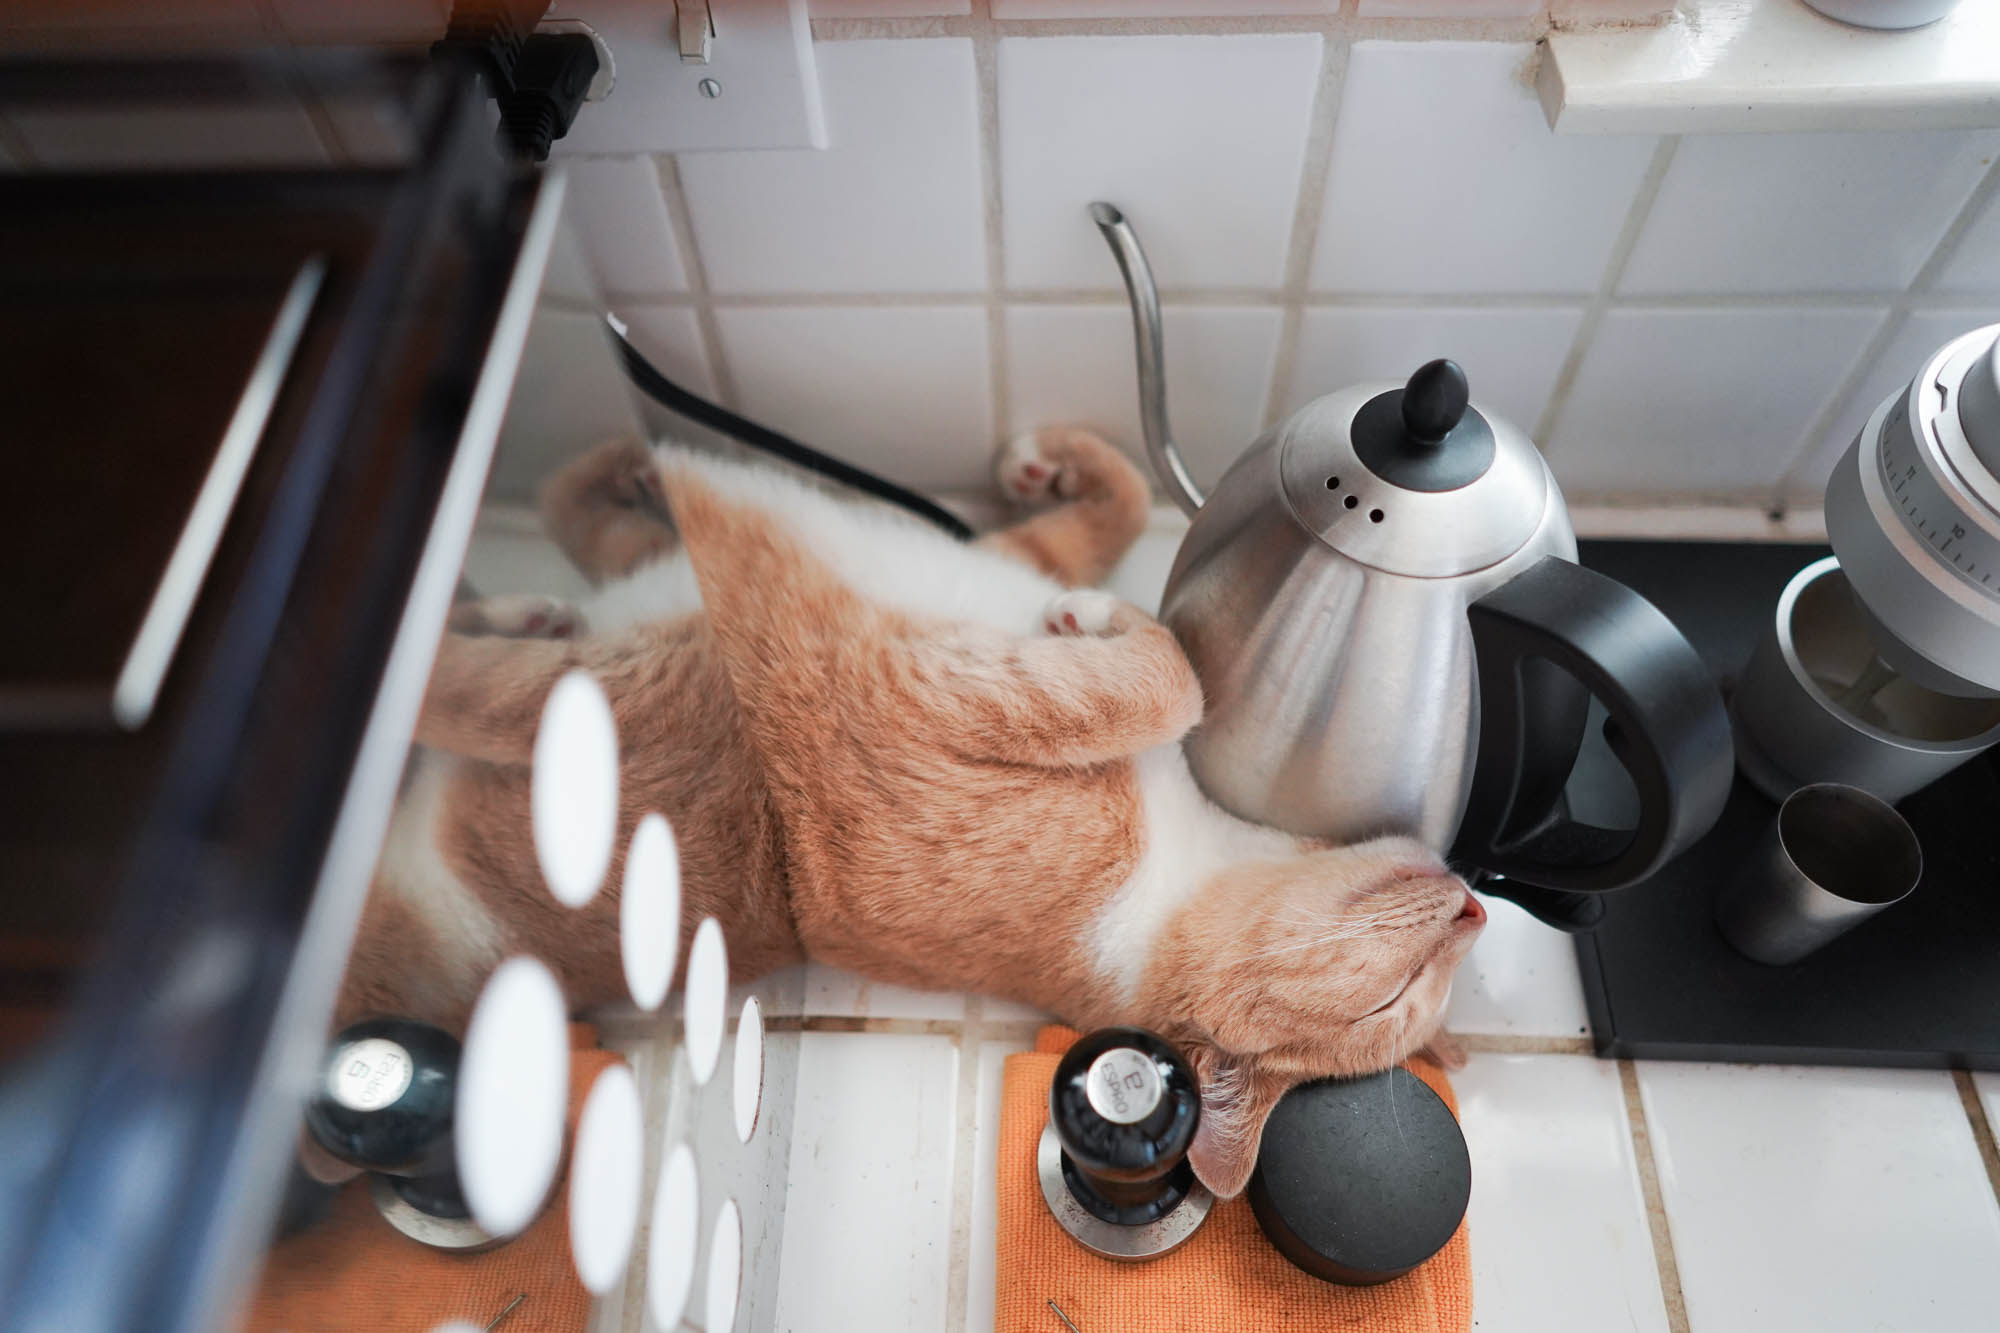 Gob the cat sleeping next to coffee equipment